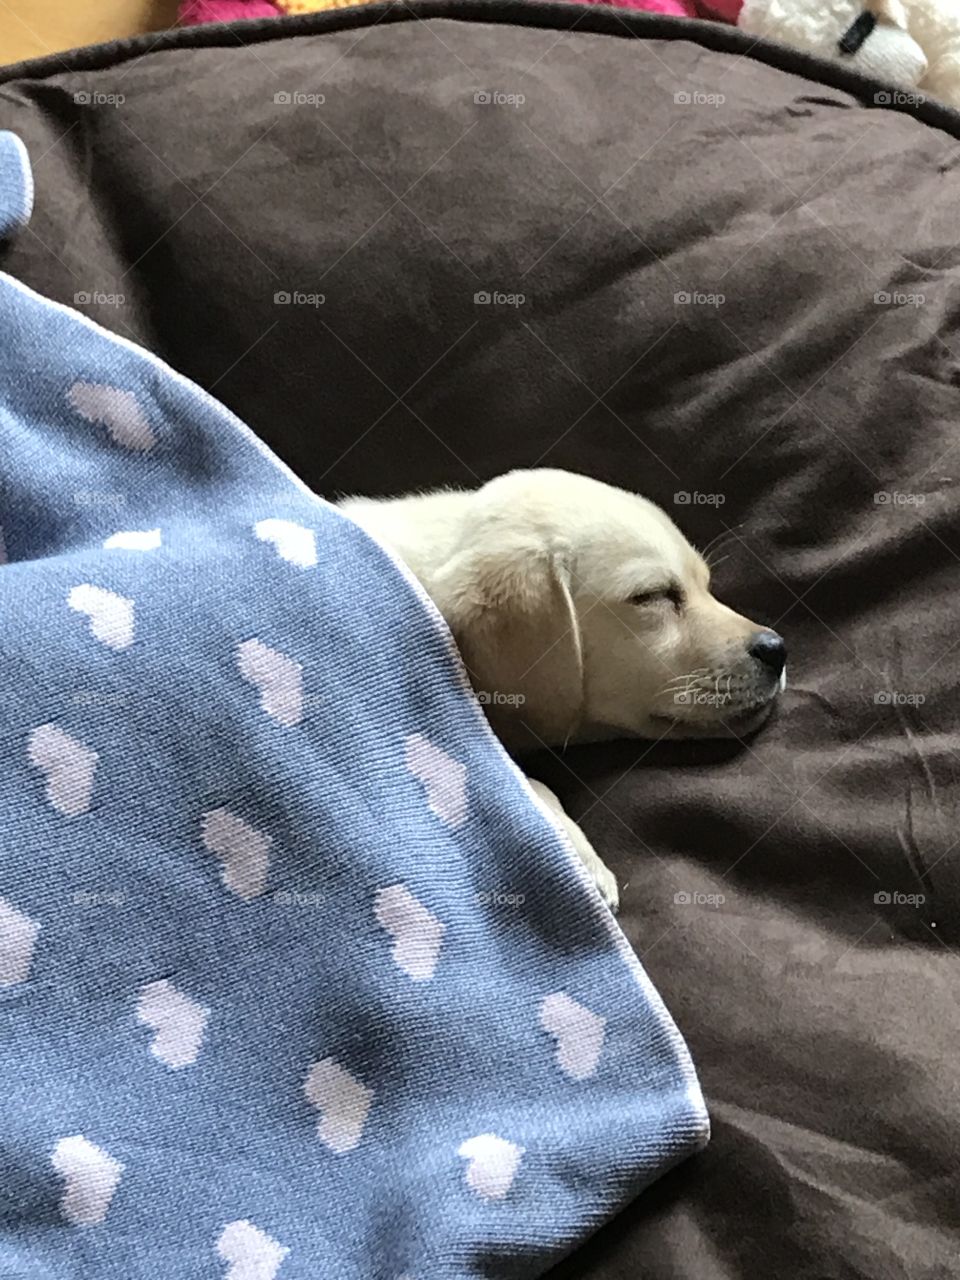 Adorable picture of a sleeping puppy. 